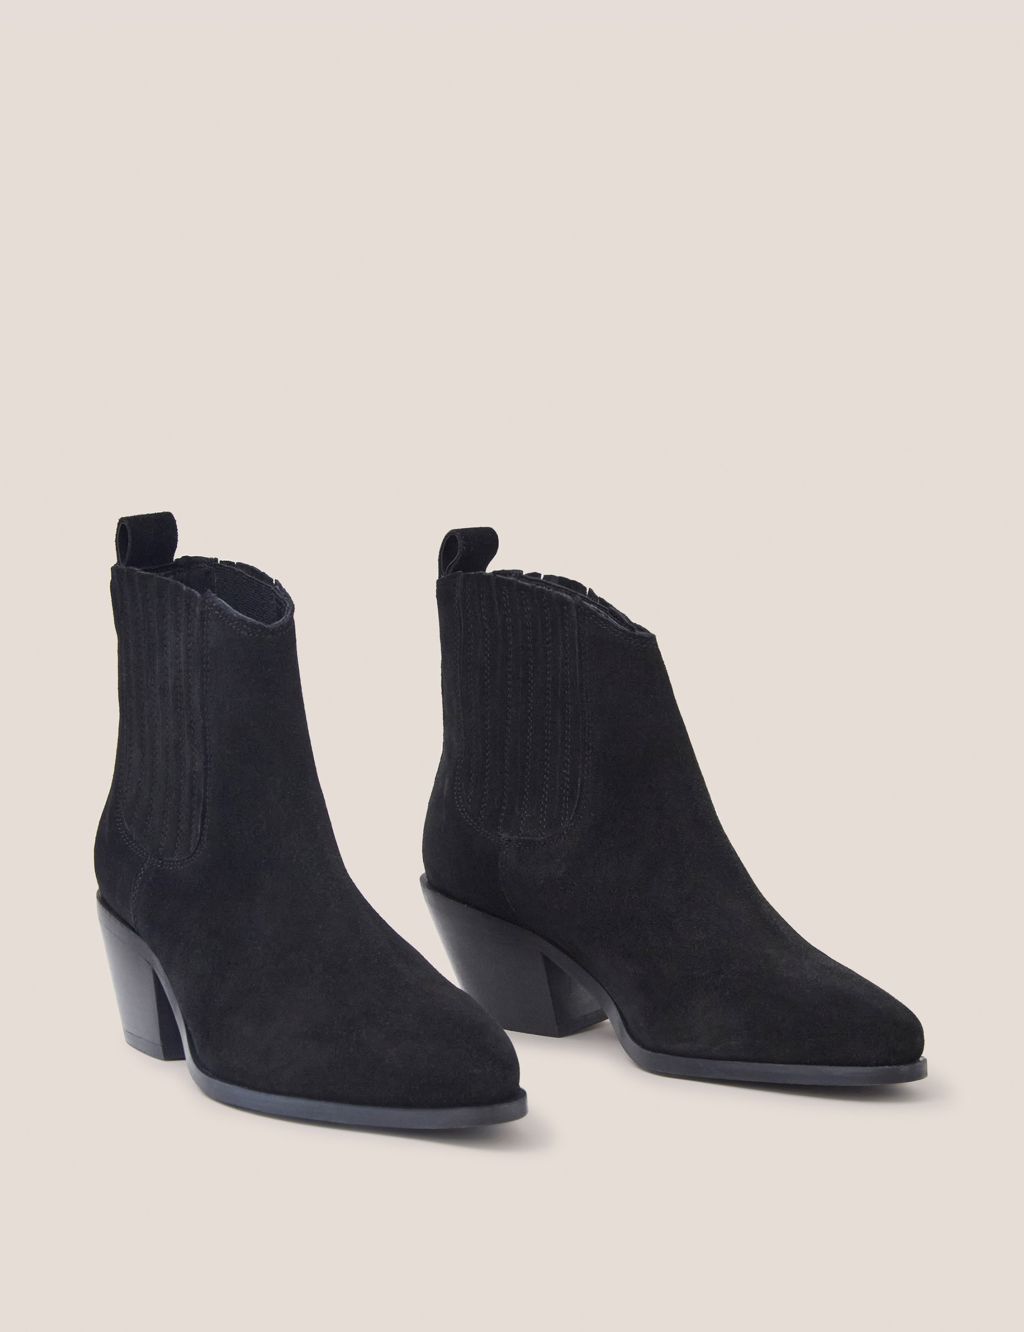 Suede Block Heel Pointed Ankle Boots image 2